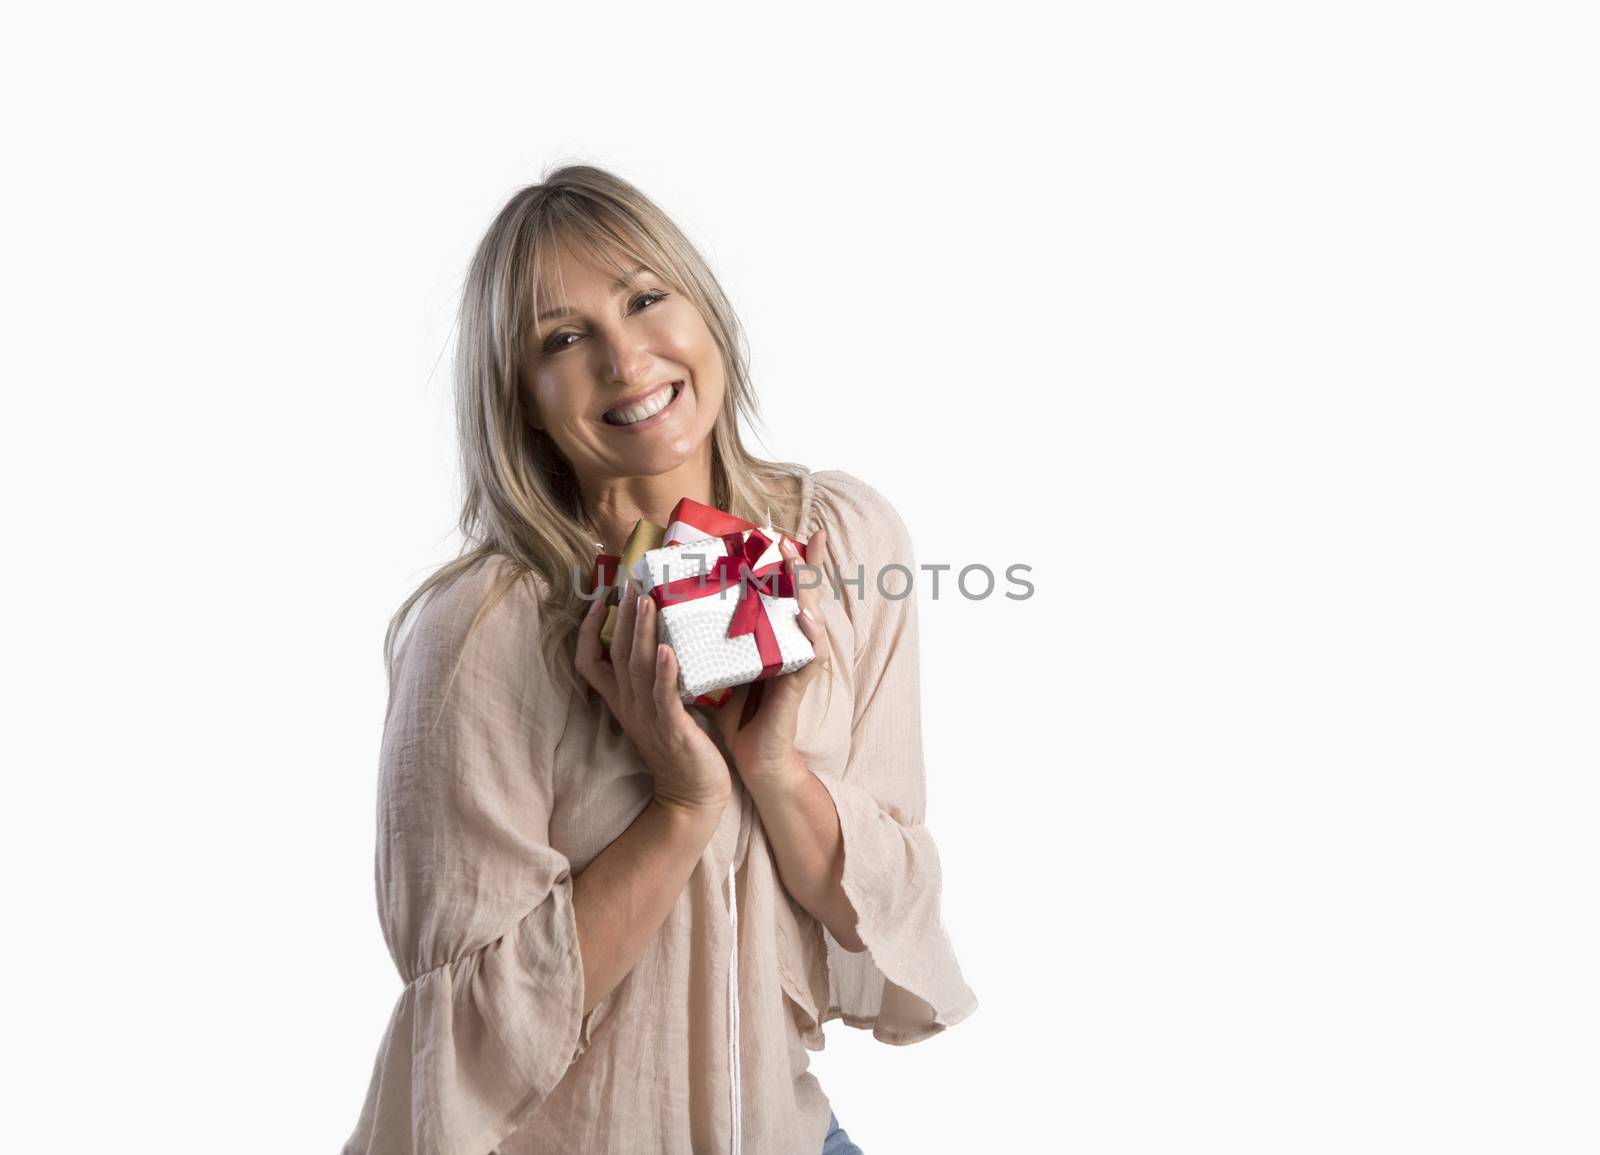 Female holding birthday or Christmas presents wrapped and tied with ribbon.  She is smiling and on a white background.